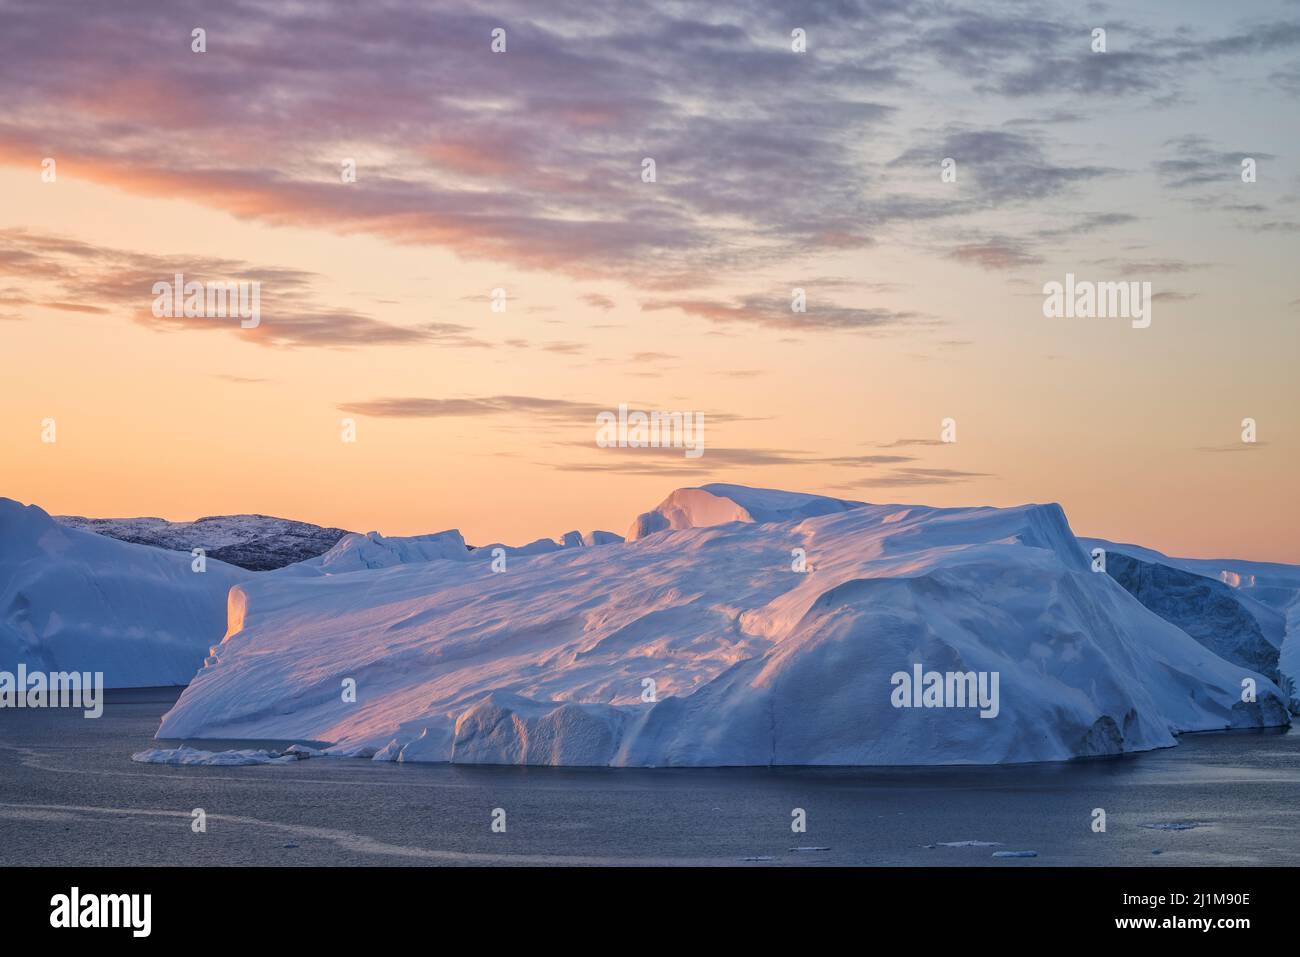 whimsical textures and shapes of the icebergs Stock Photo